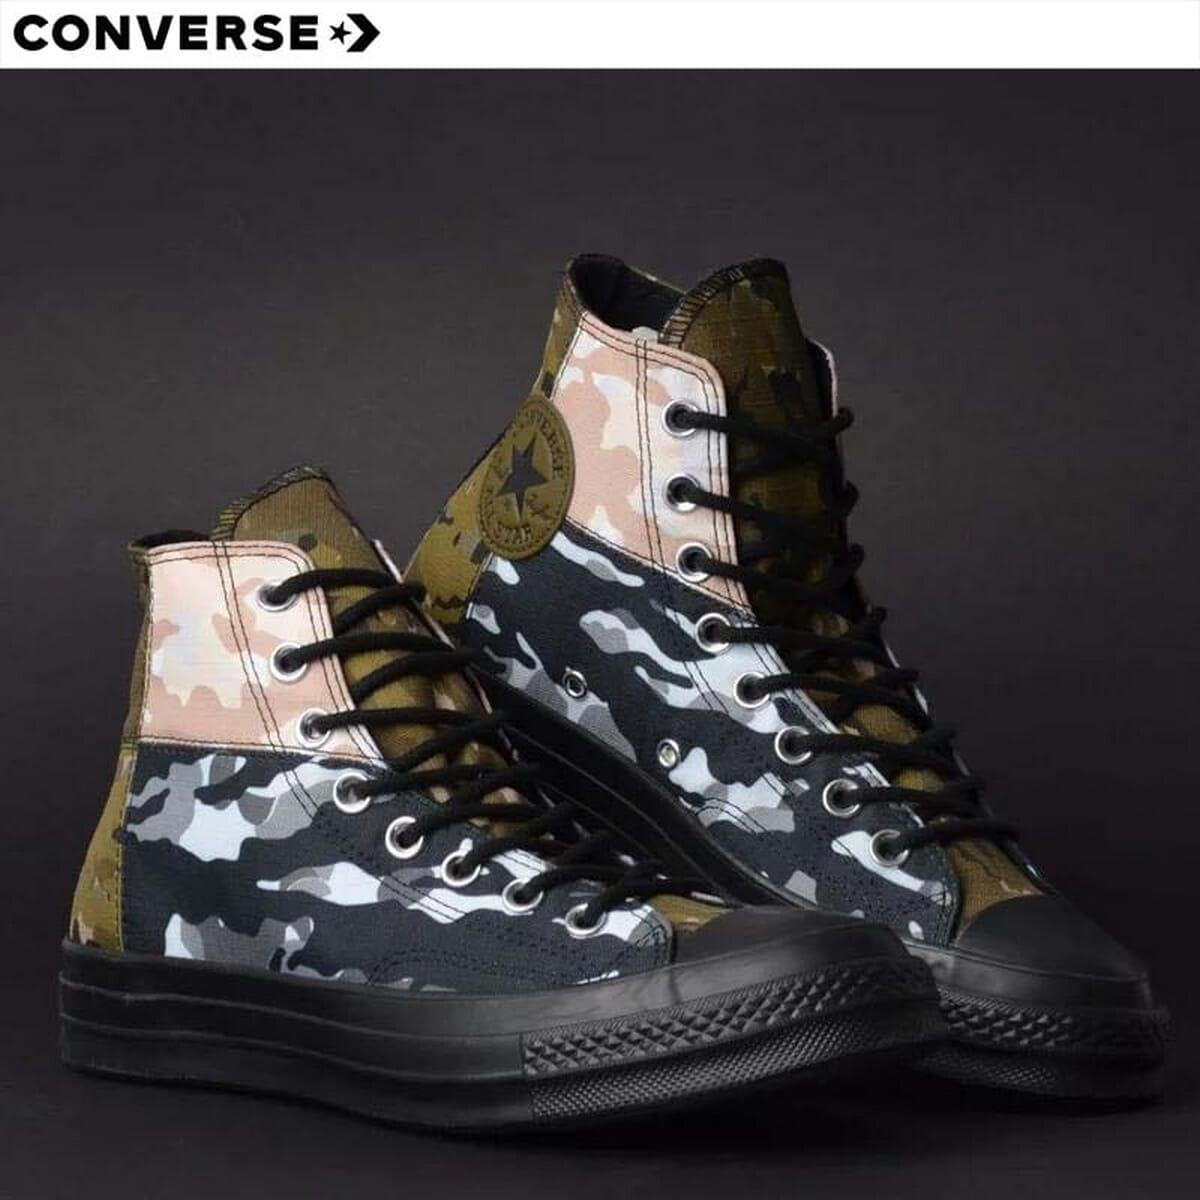 converse chuck taylor all star 70s blocked camo high top white carbon grey egret for unisex 165912c